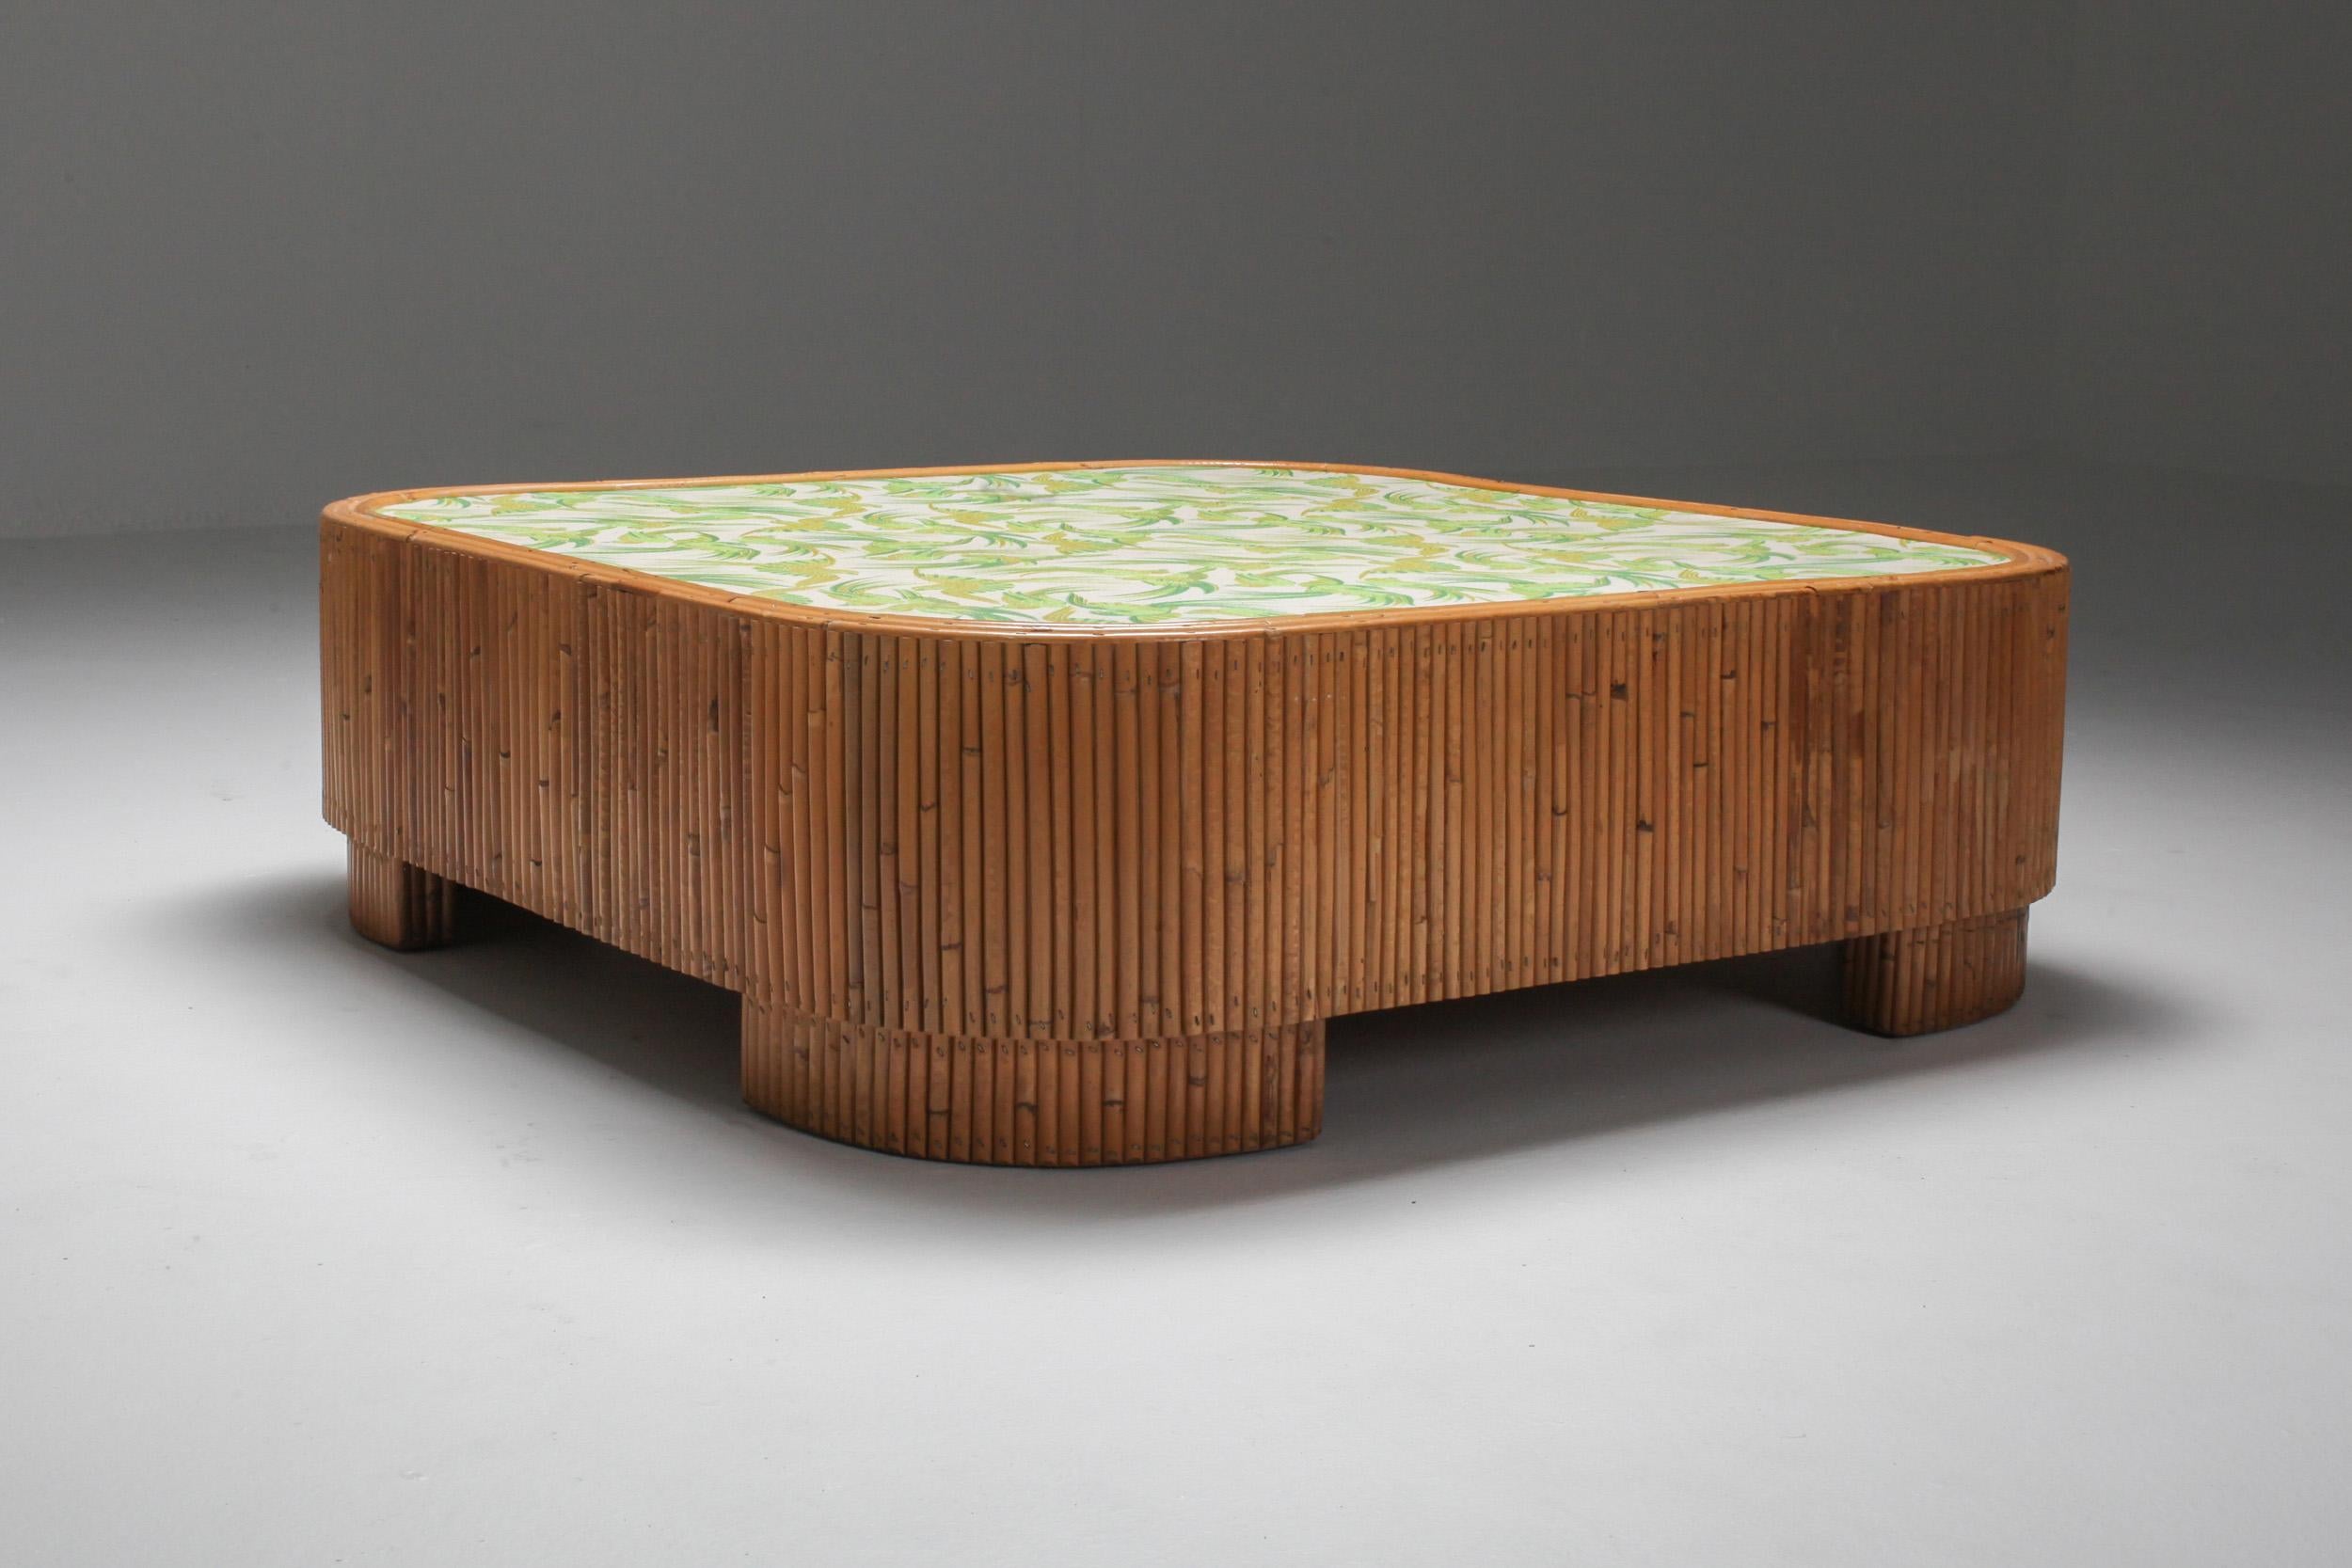 Tropicalist coffee table, bamboo, Vivai del Sud, 1970s, Italy.

Paradise bird motifs in variations of green 
Superb quality wicker and bamboo frame.
 